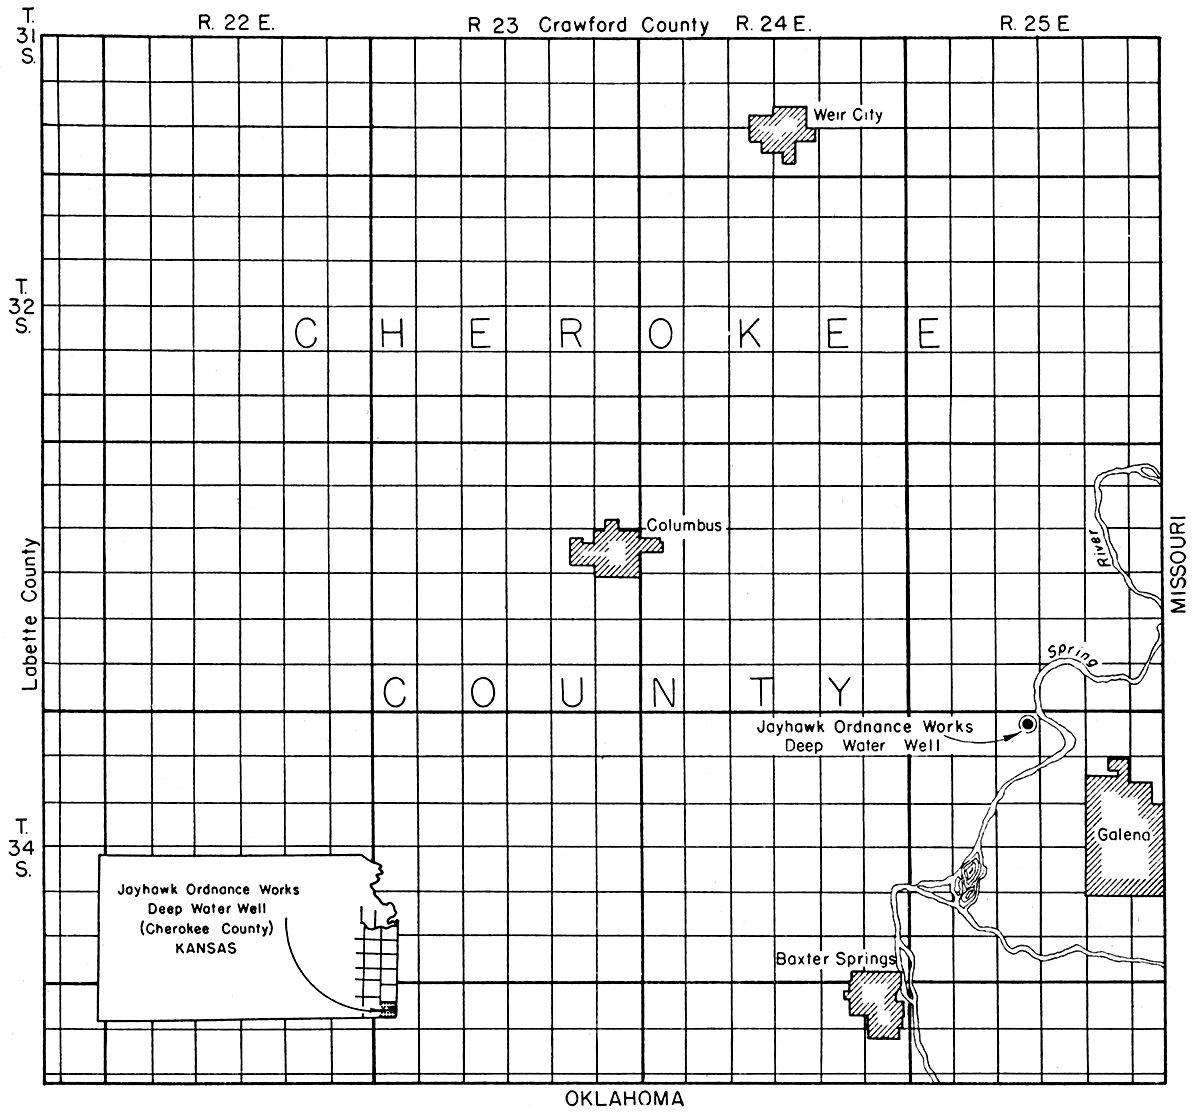 Index map of Cherokee County, Kansas showing location of the Jayhawk Ordnance Works well.